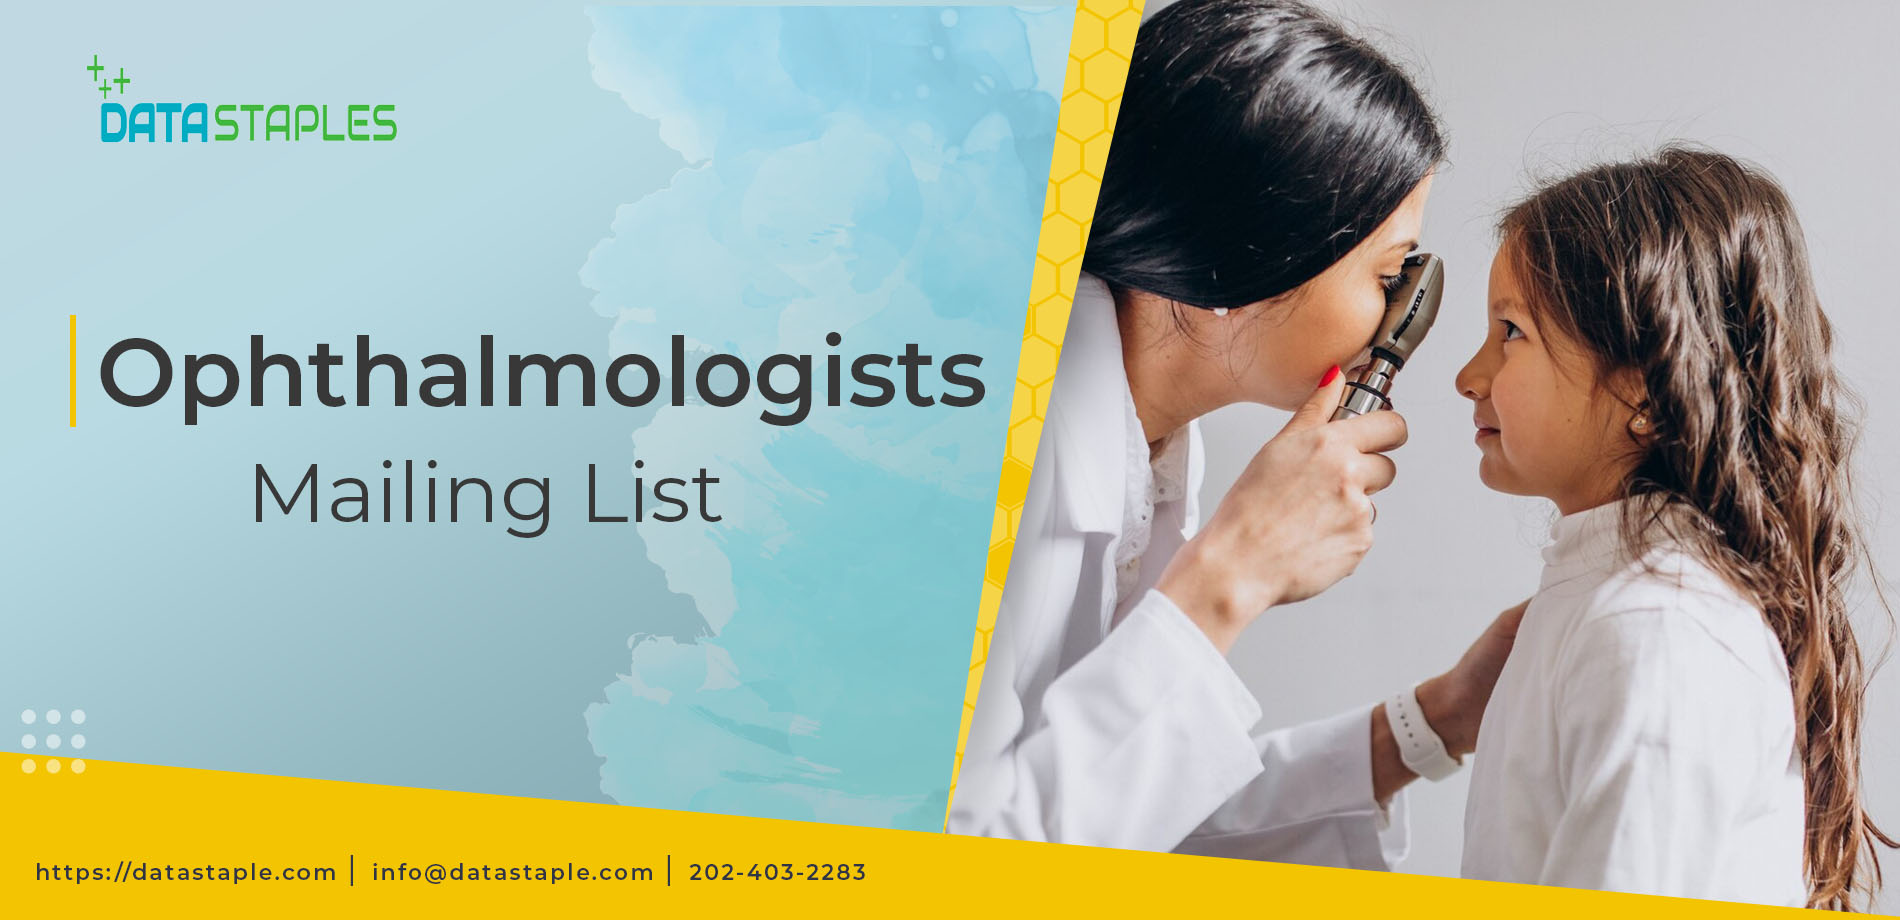 Ophthalmologists Mailing List | DataStaples